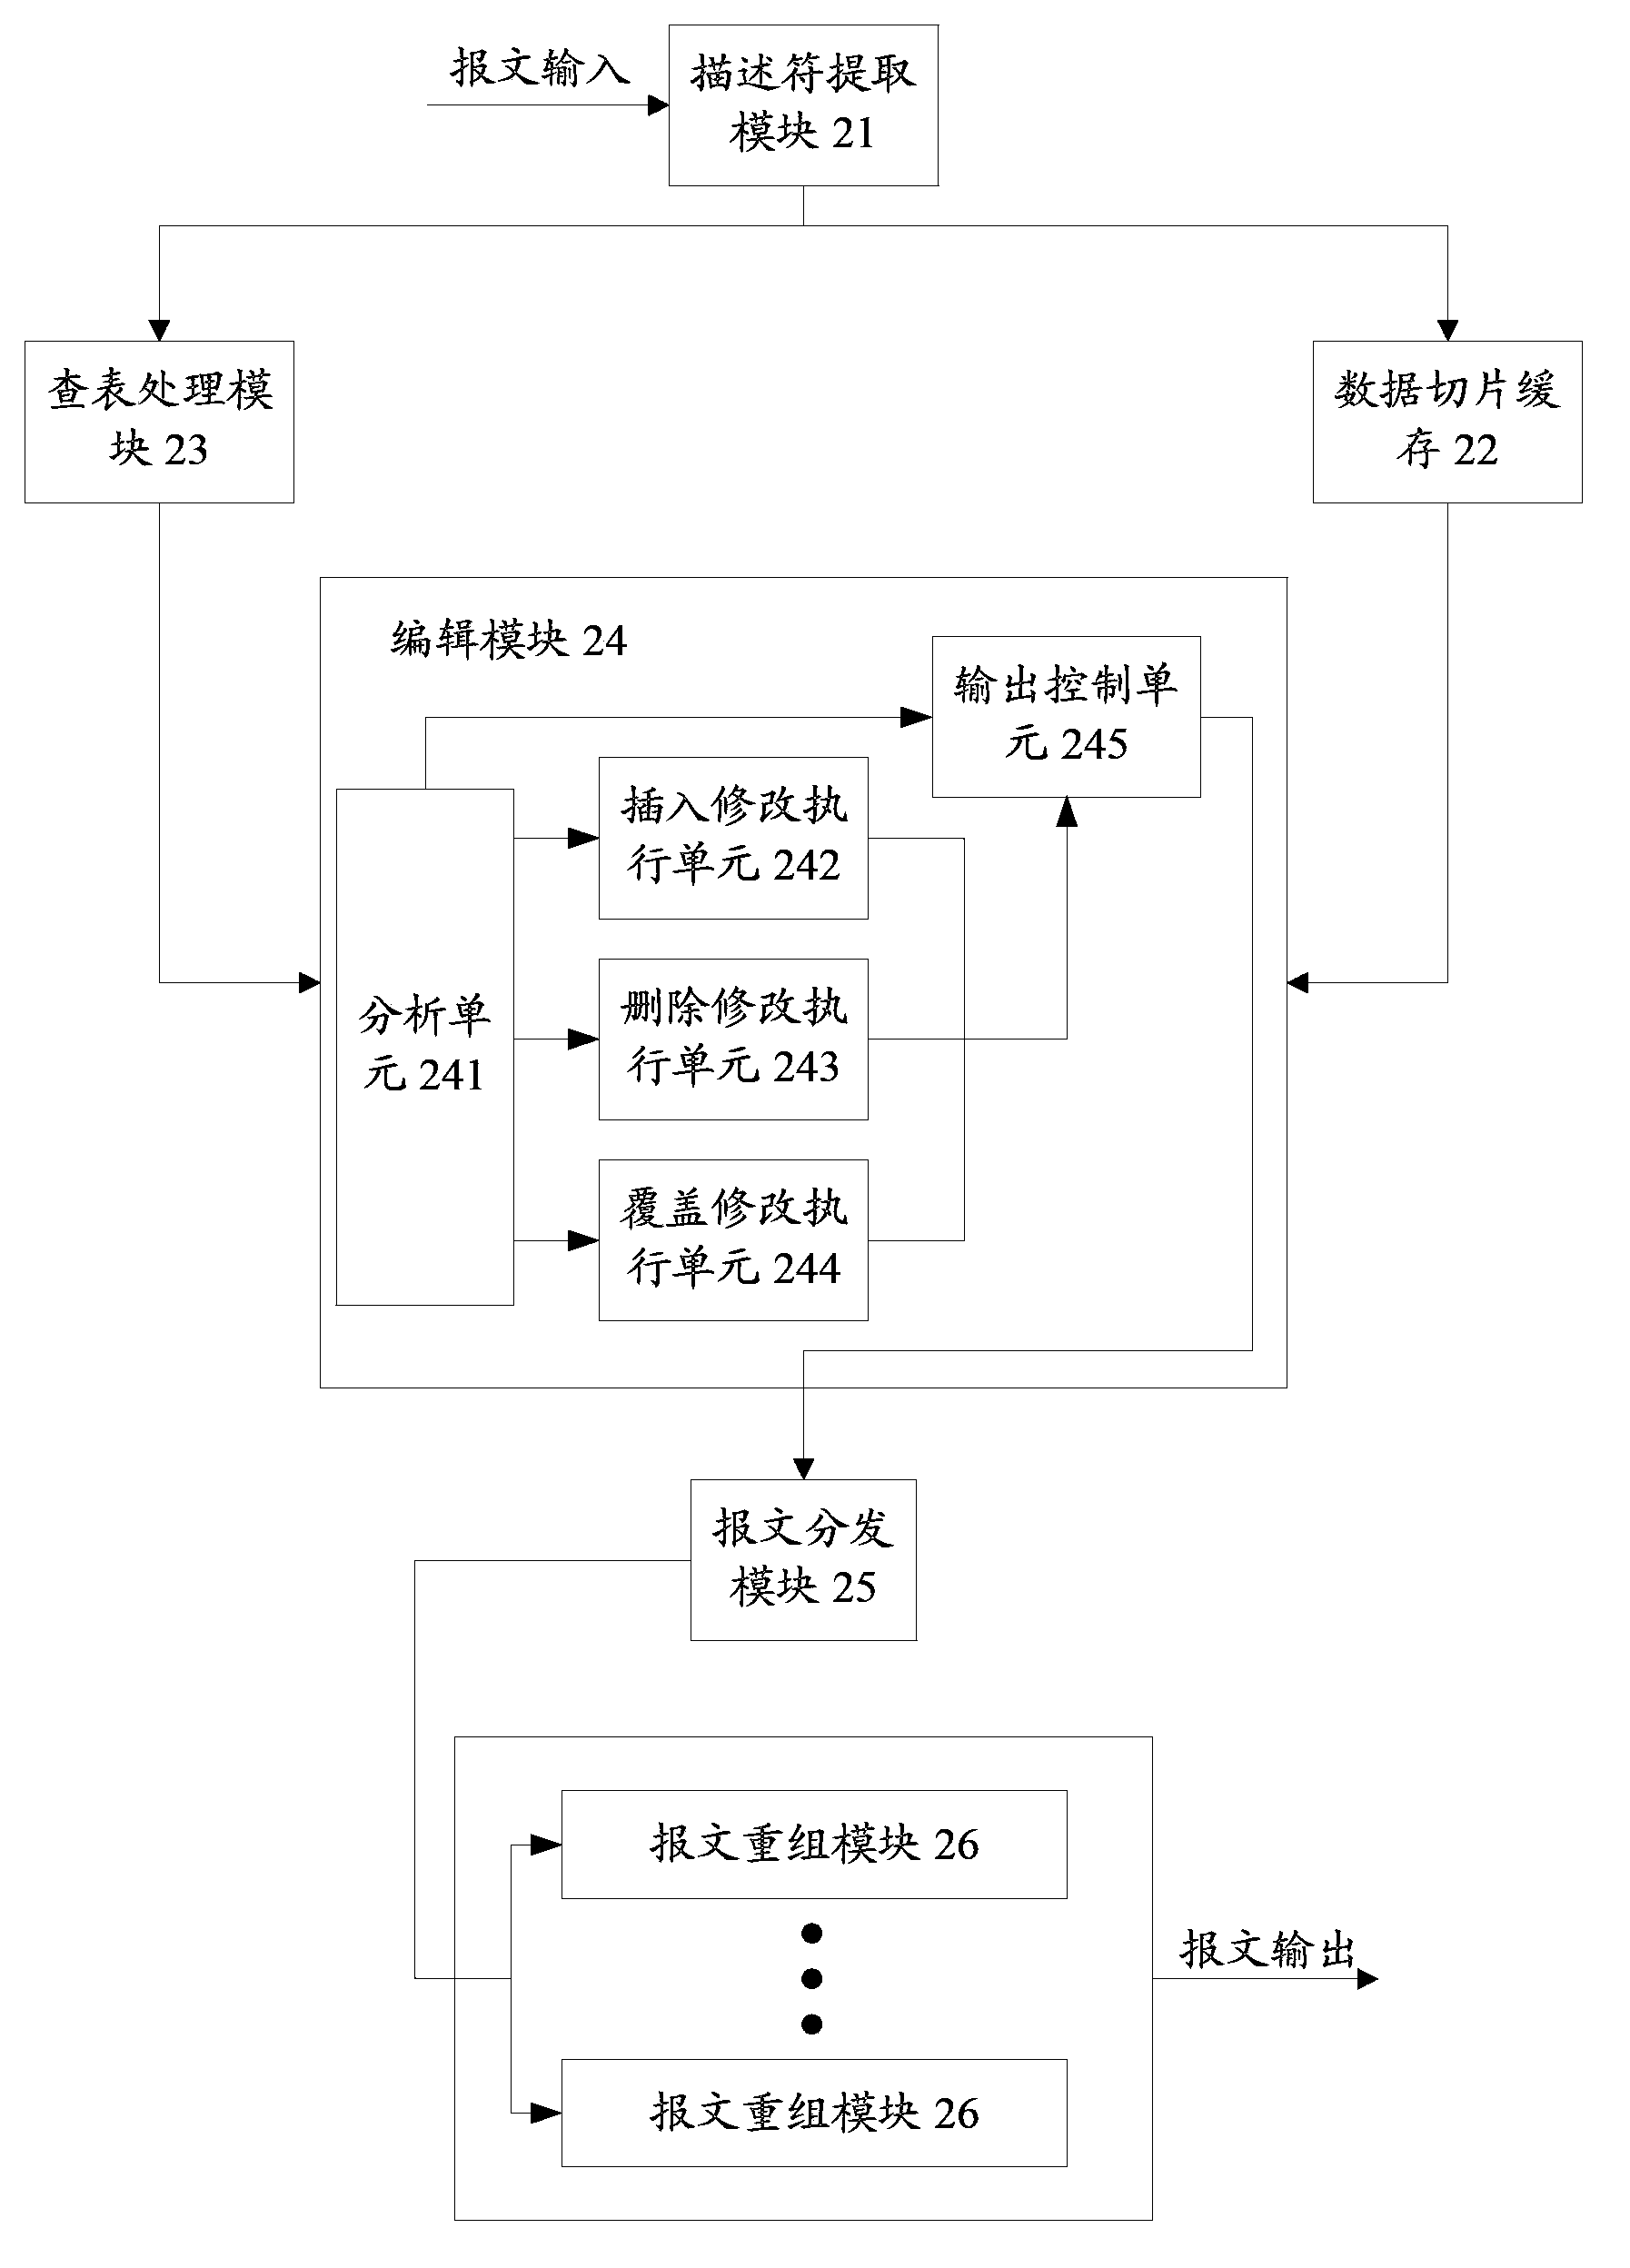 Method and apparatus for modifying and forwarding message in data communication network